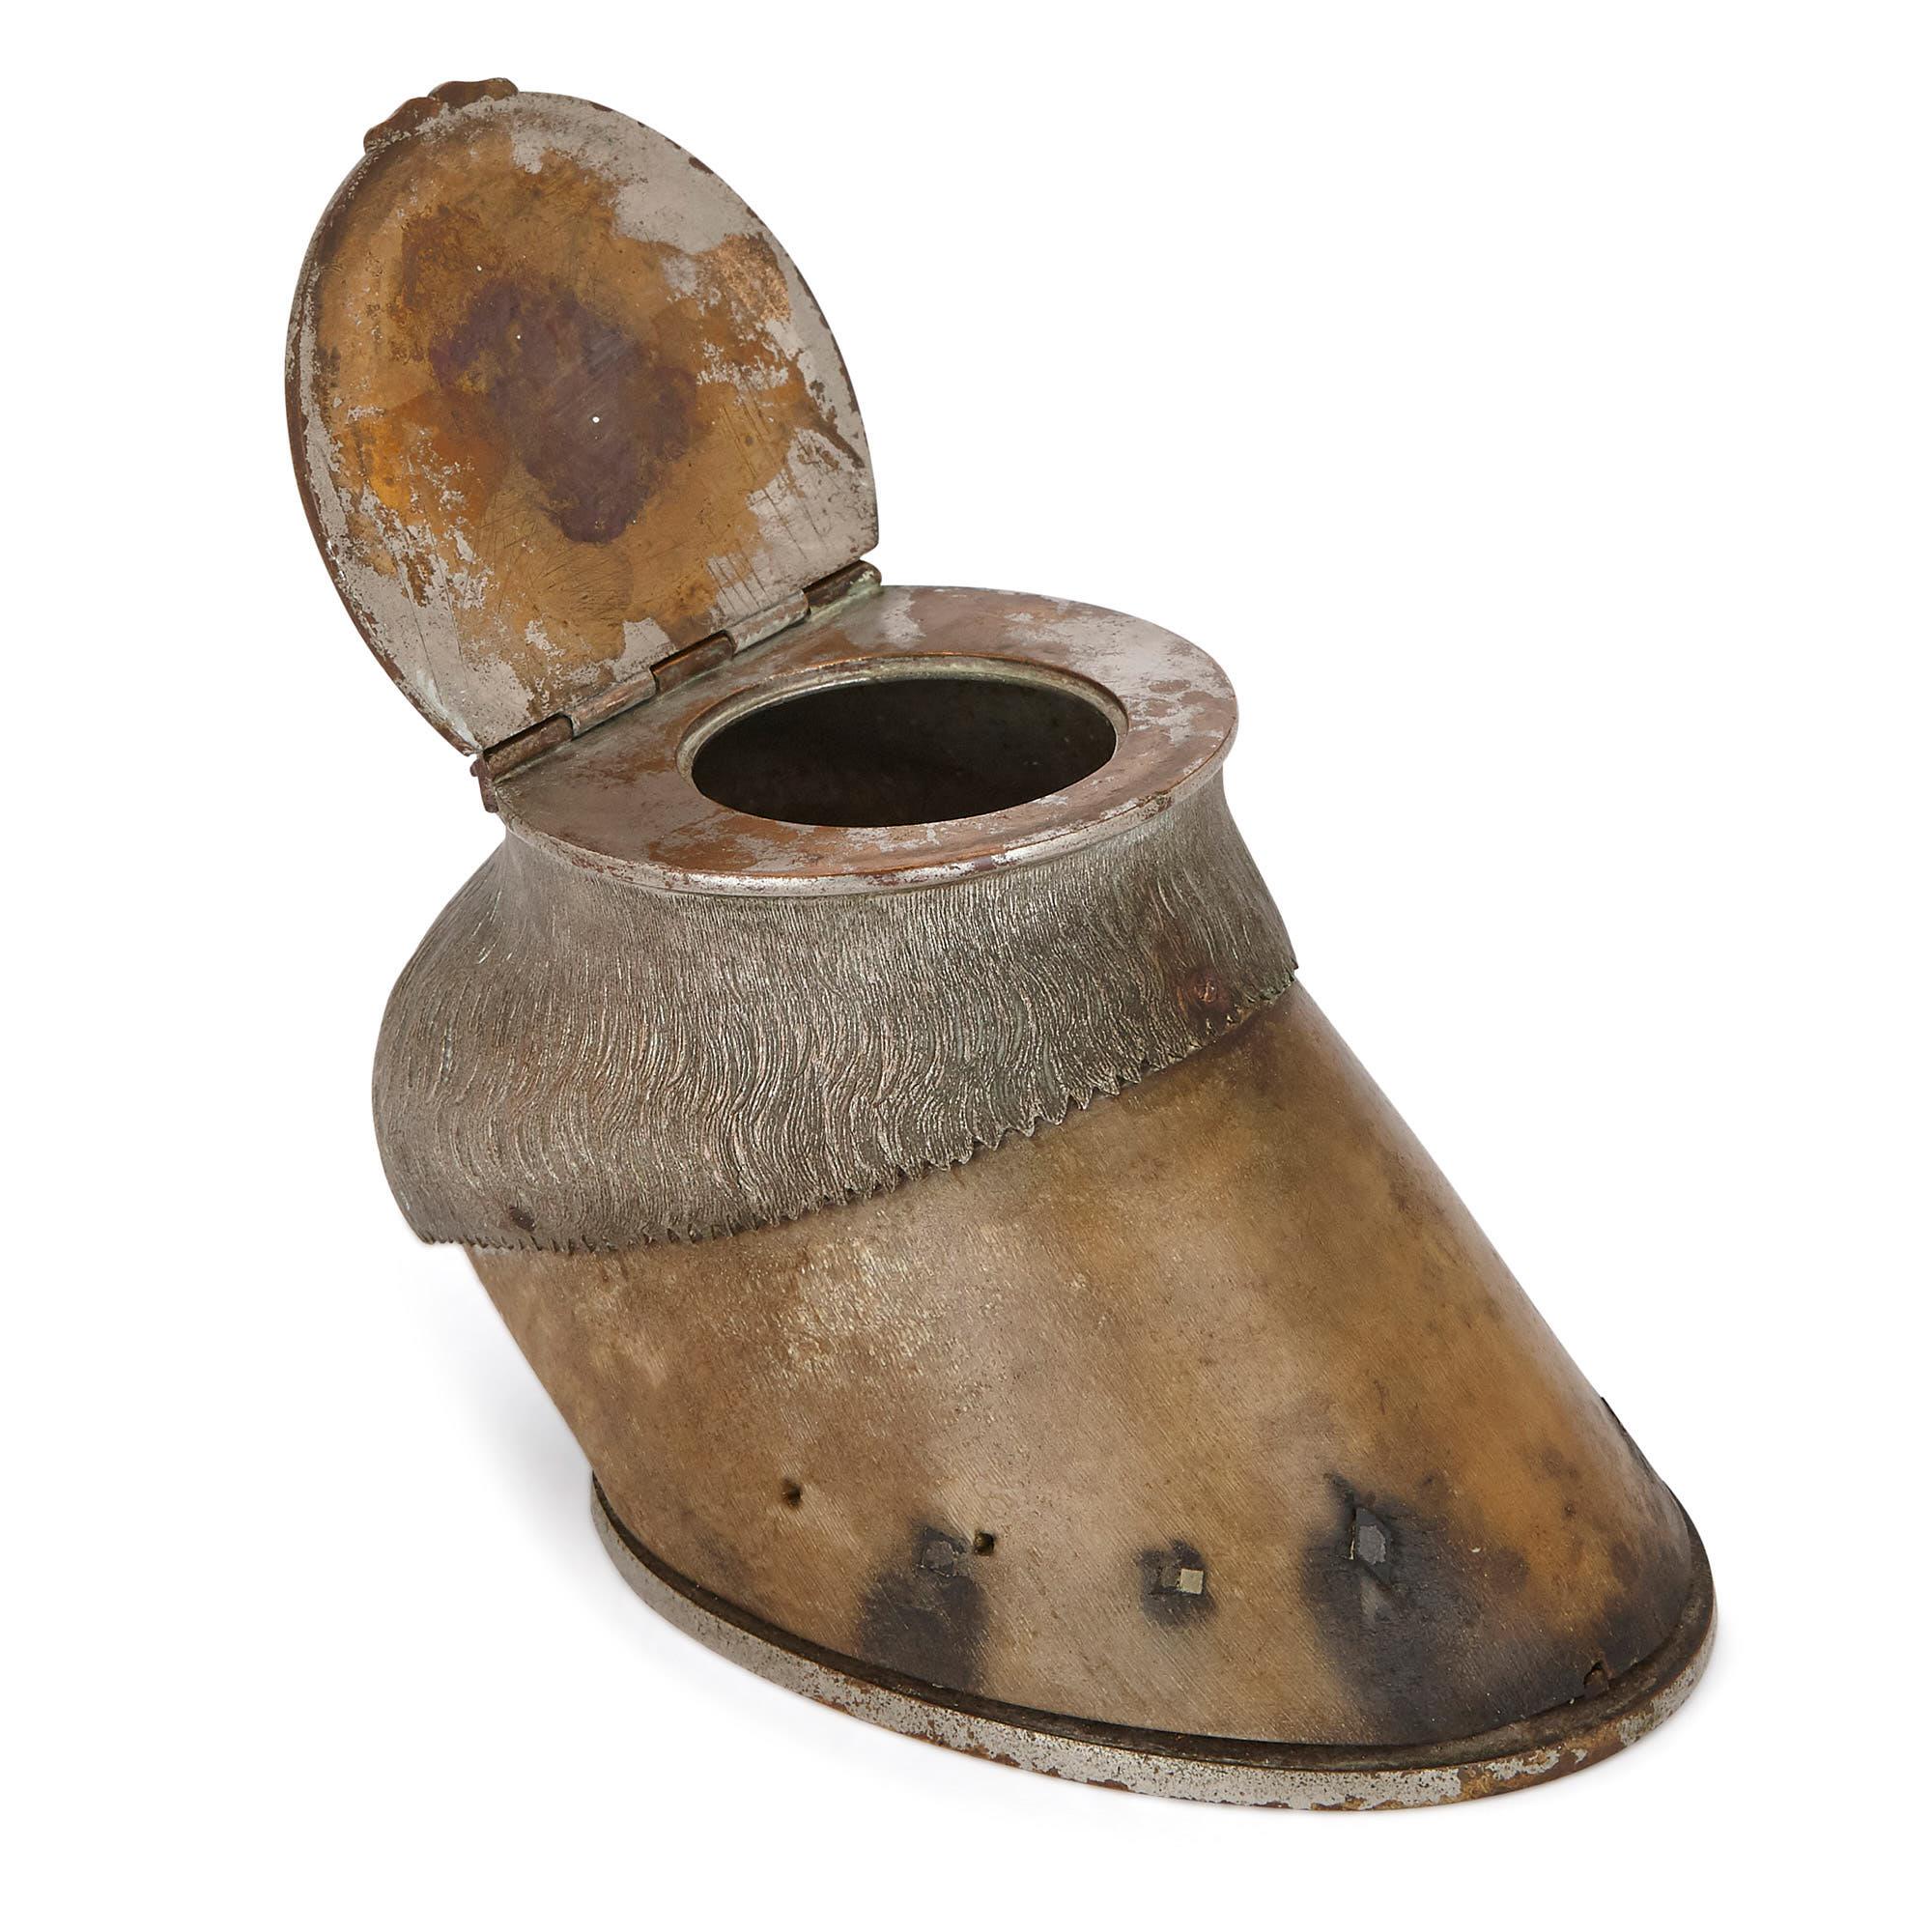 These interesting inkwells were crafted in Britain between the Victorian period and early to mid-20th century. 

The works have been created from horse hooves, applied with sterling silver mounts. Each hoof has been set onto a silver horseshoe and